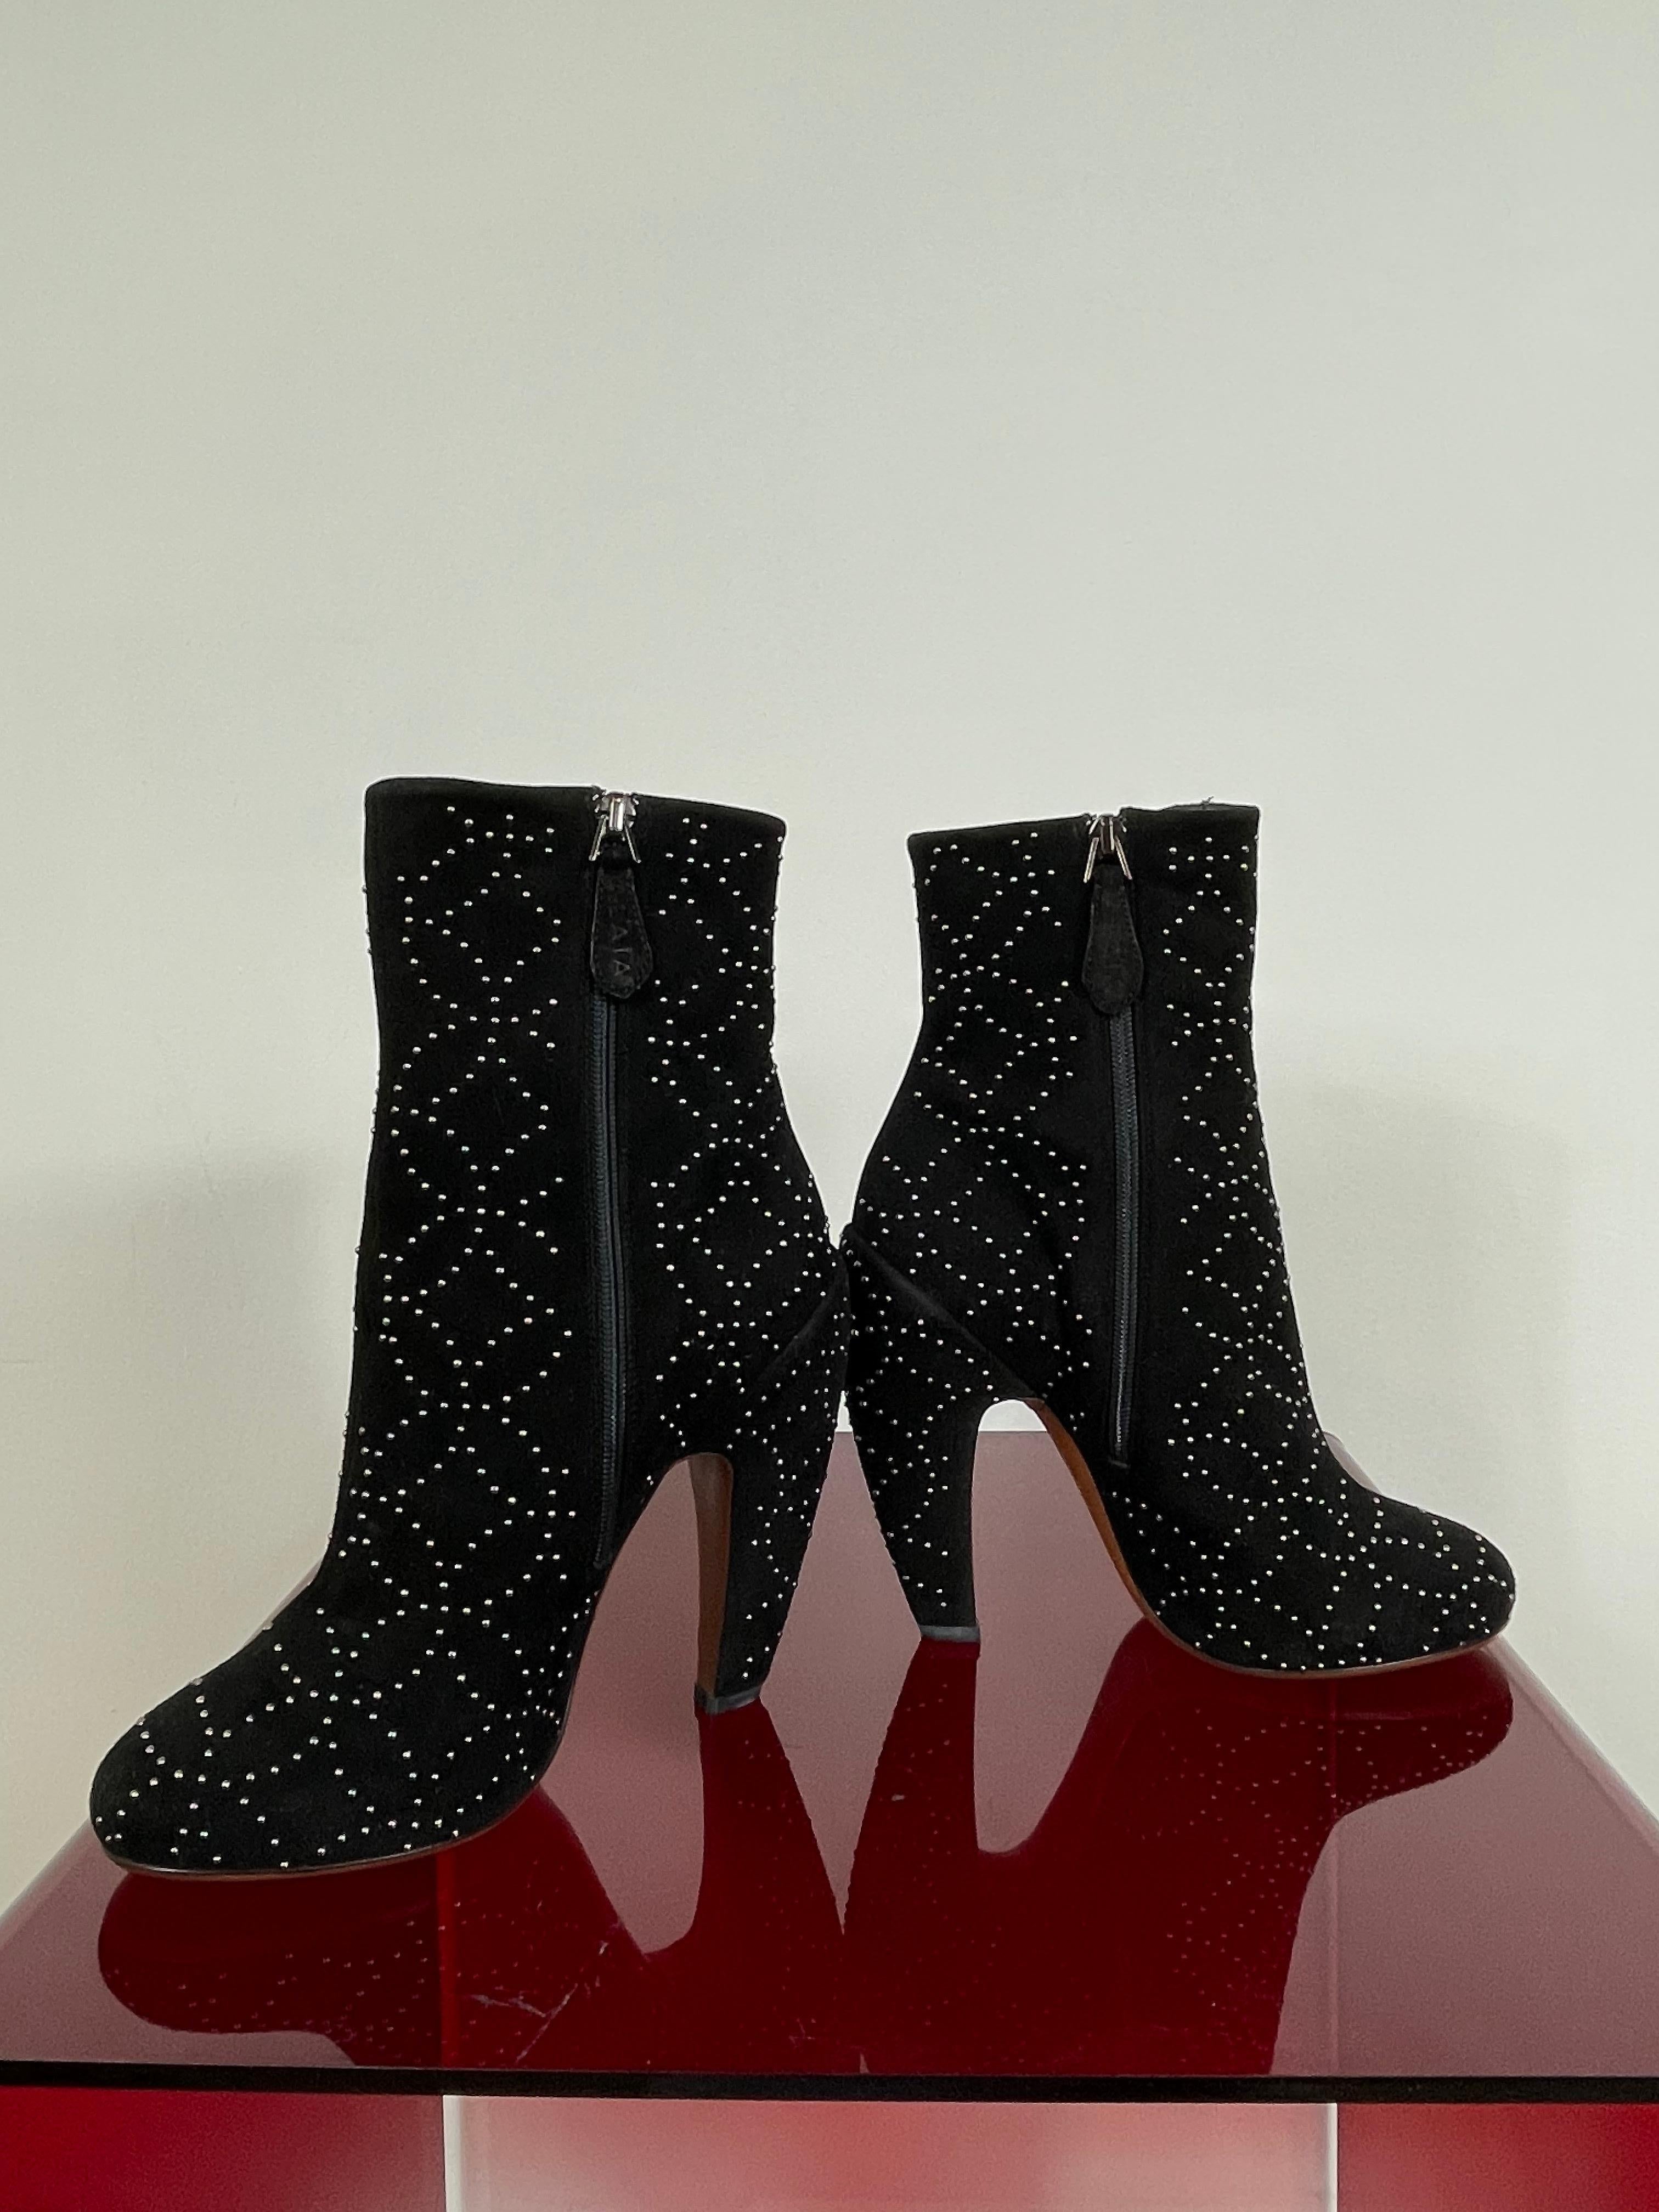 Alaia ankle boot.
In black suede. Featuring small studs as bright application. Perfect for festive time!
Number 36 Italian. Heels measure 13 cm.
Conditions: New - Brand-new, not previously worn or owned. 
It comes with original dust bag.
Retail